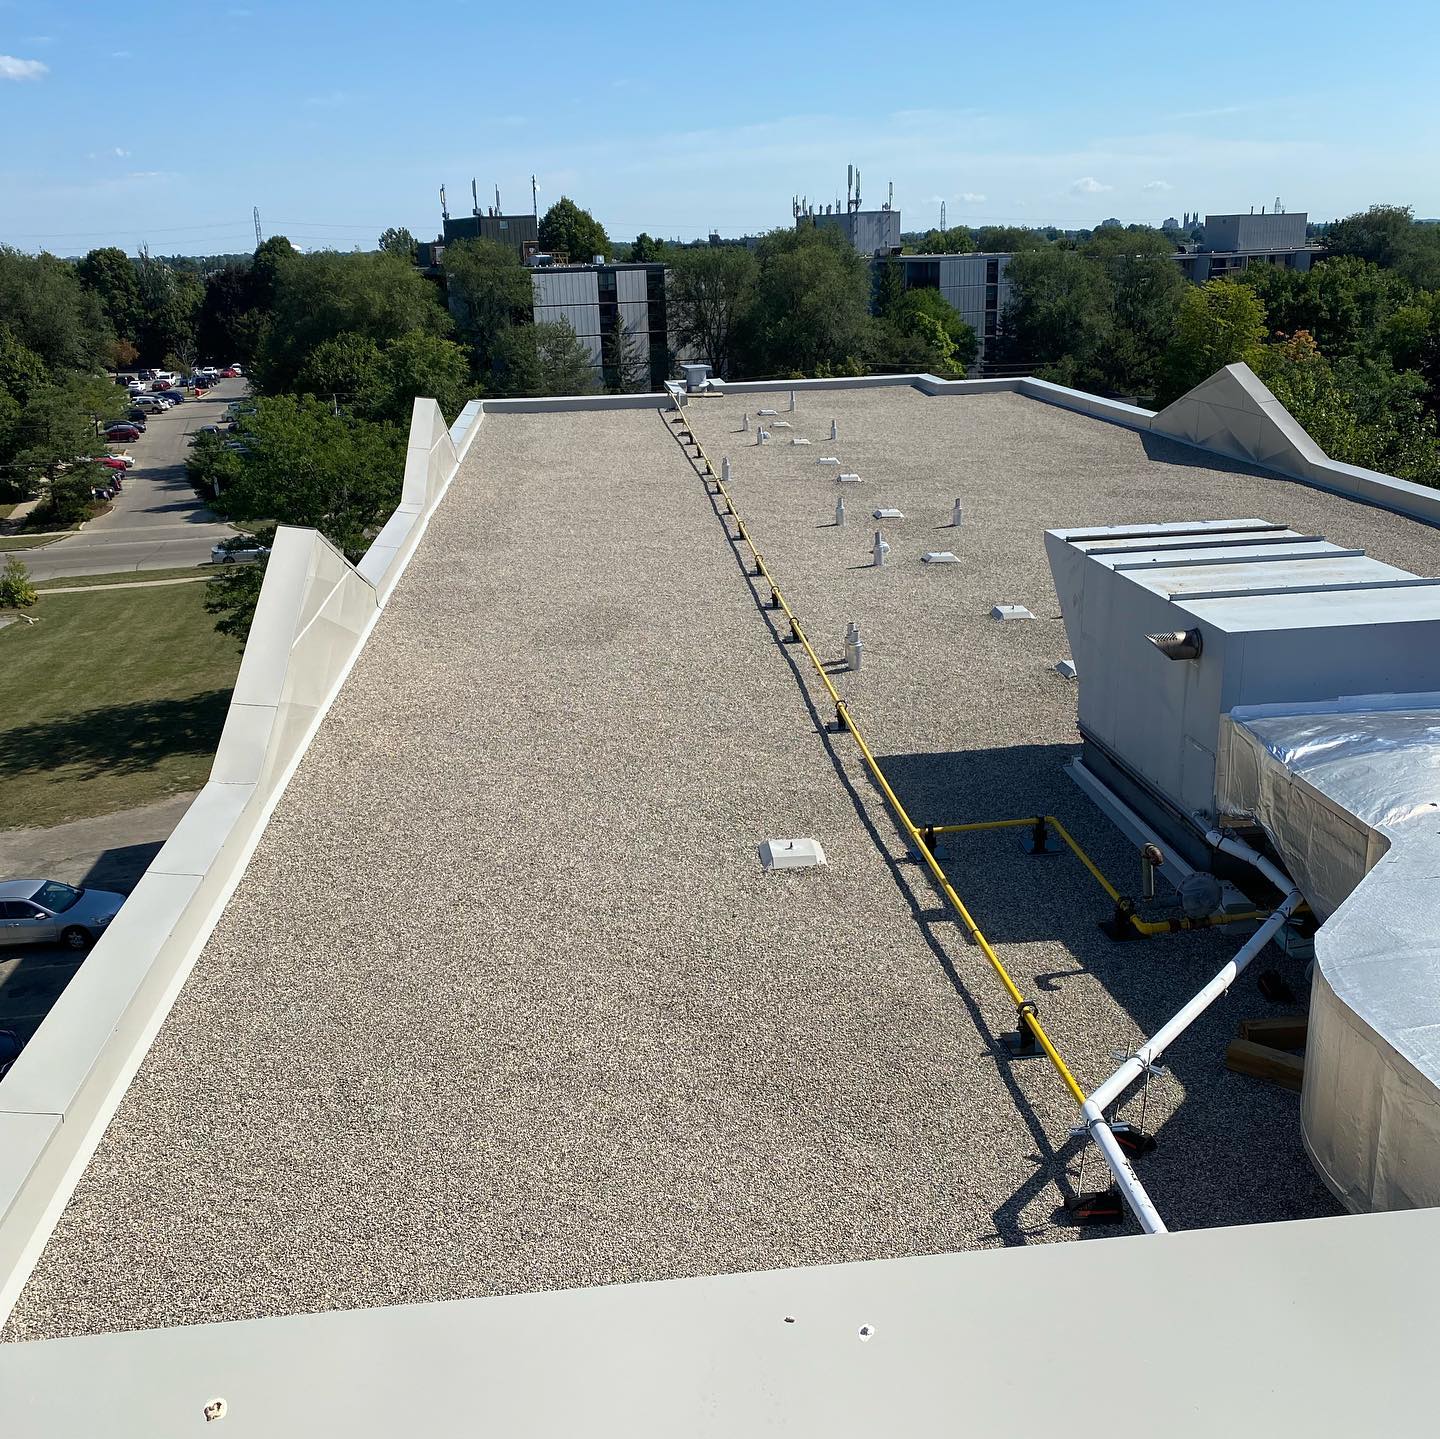 Awesome job by our team on this flat re-roof project completed this summer 🏢👏
.
.
.
#flatroofing #roofingcontractor #guelphbusiness #constructionproject